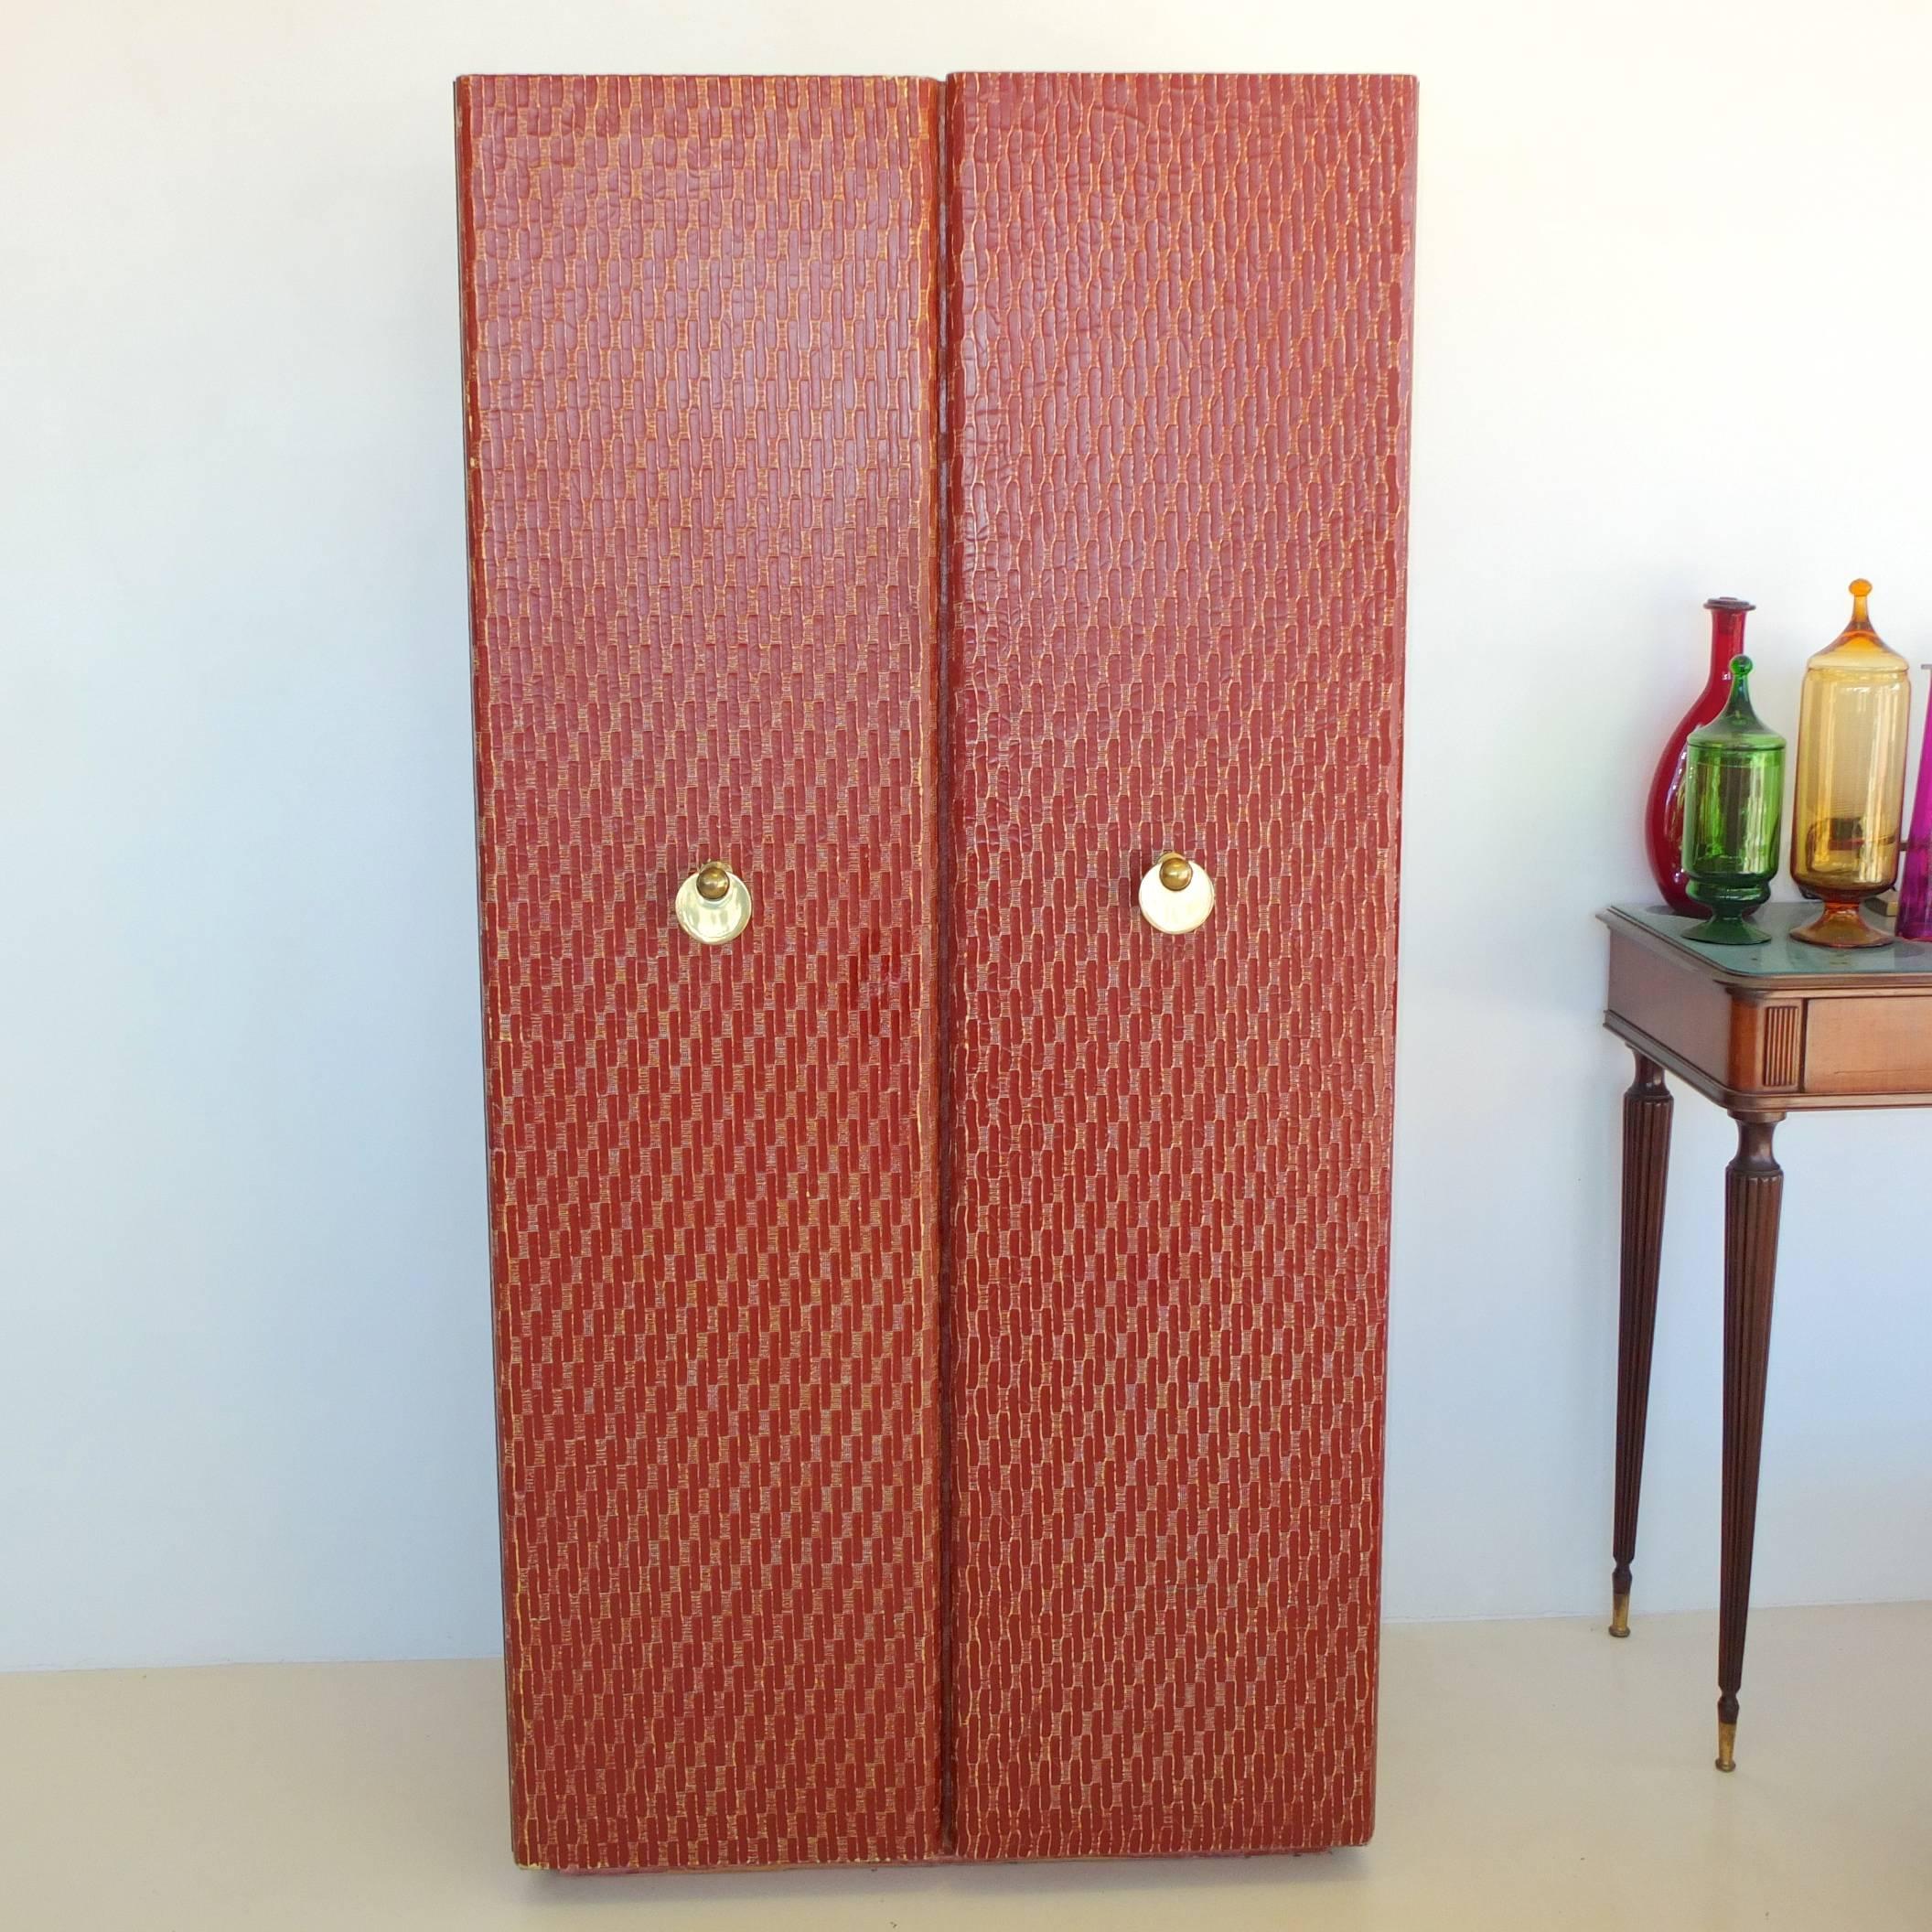 Nearly six foot standing bar cabinet wrapped in a textured cloth sealed in a dark red finish with two full length doors which open to reveal three levels the bottom for bottle storage the middle compartment, red lacquered and mirror-backed above a